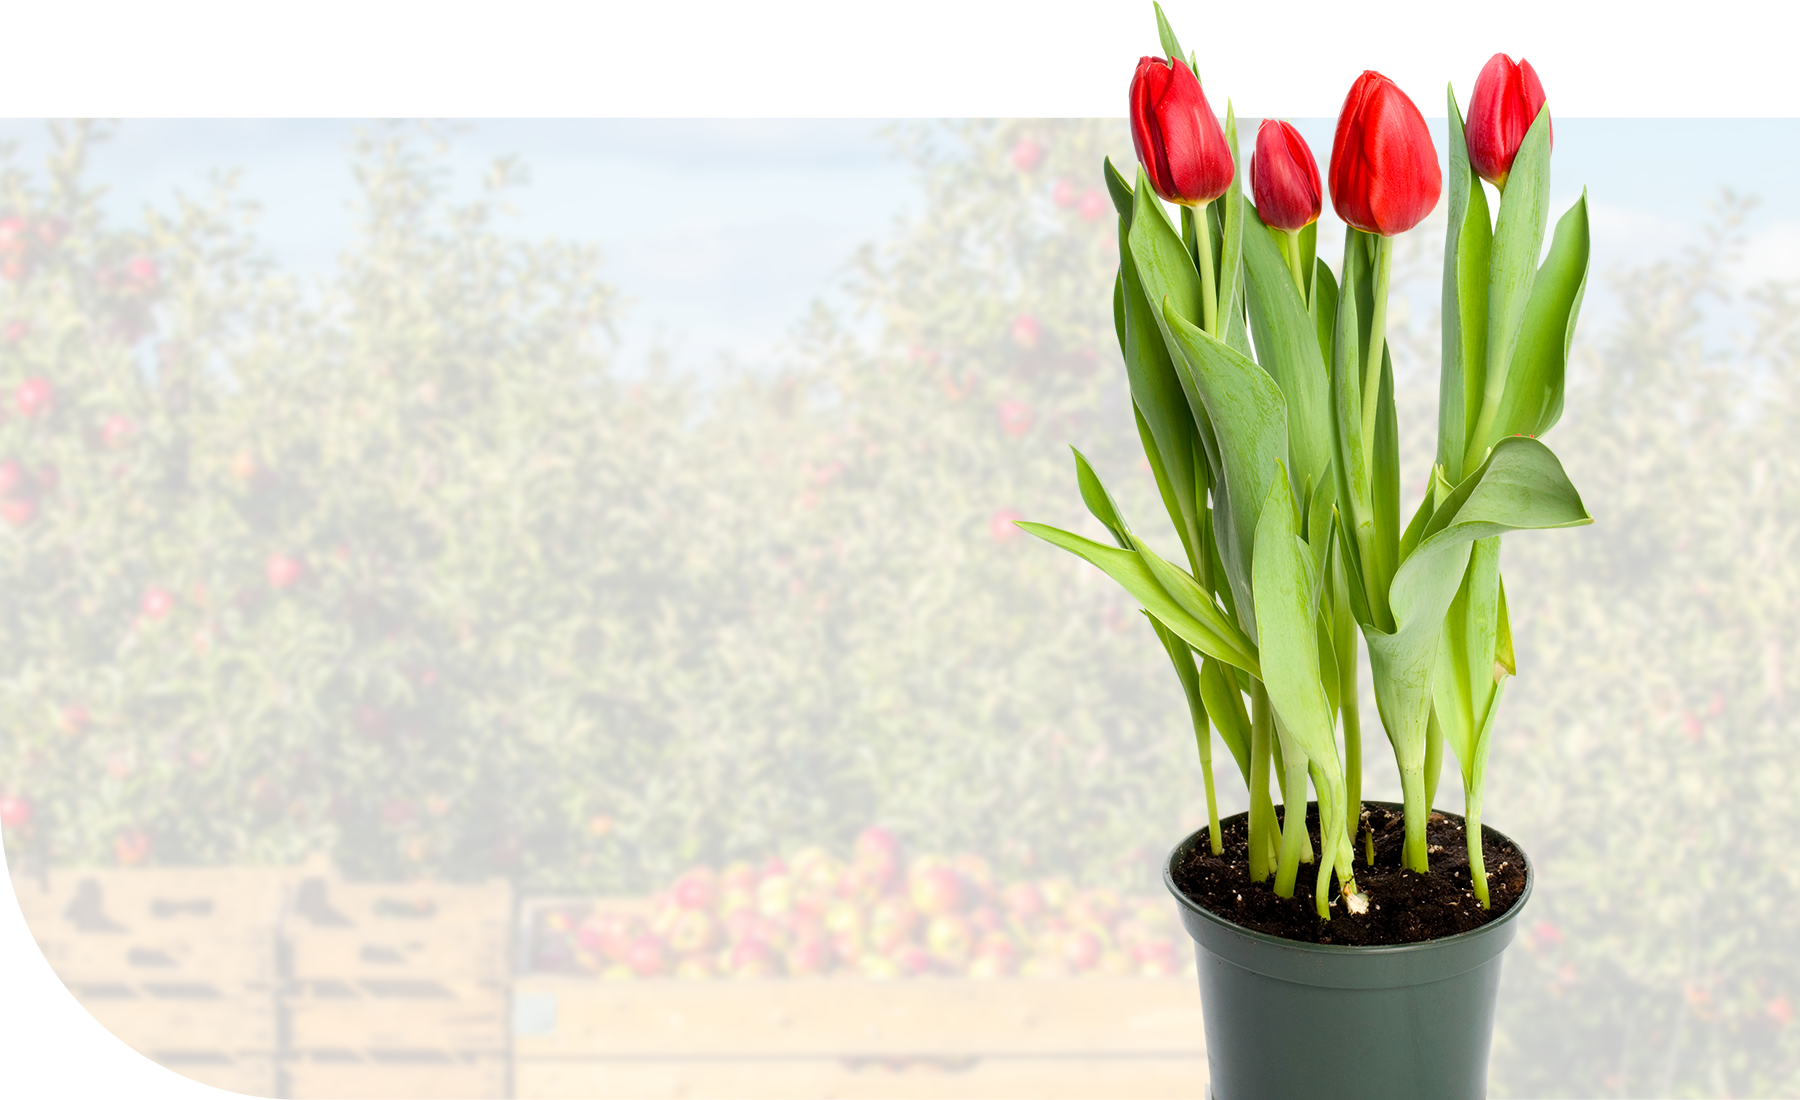 A potted plant of tulips, with crates of apples in the background.